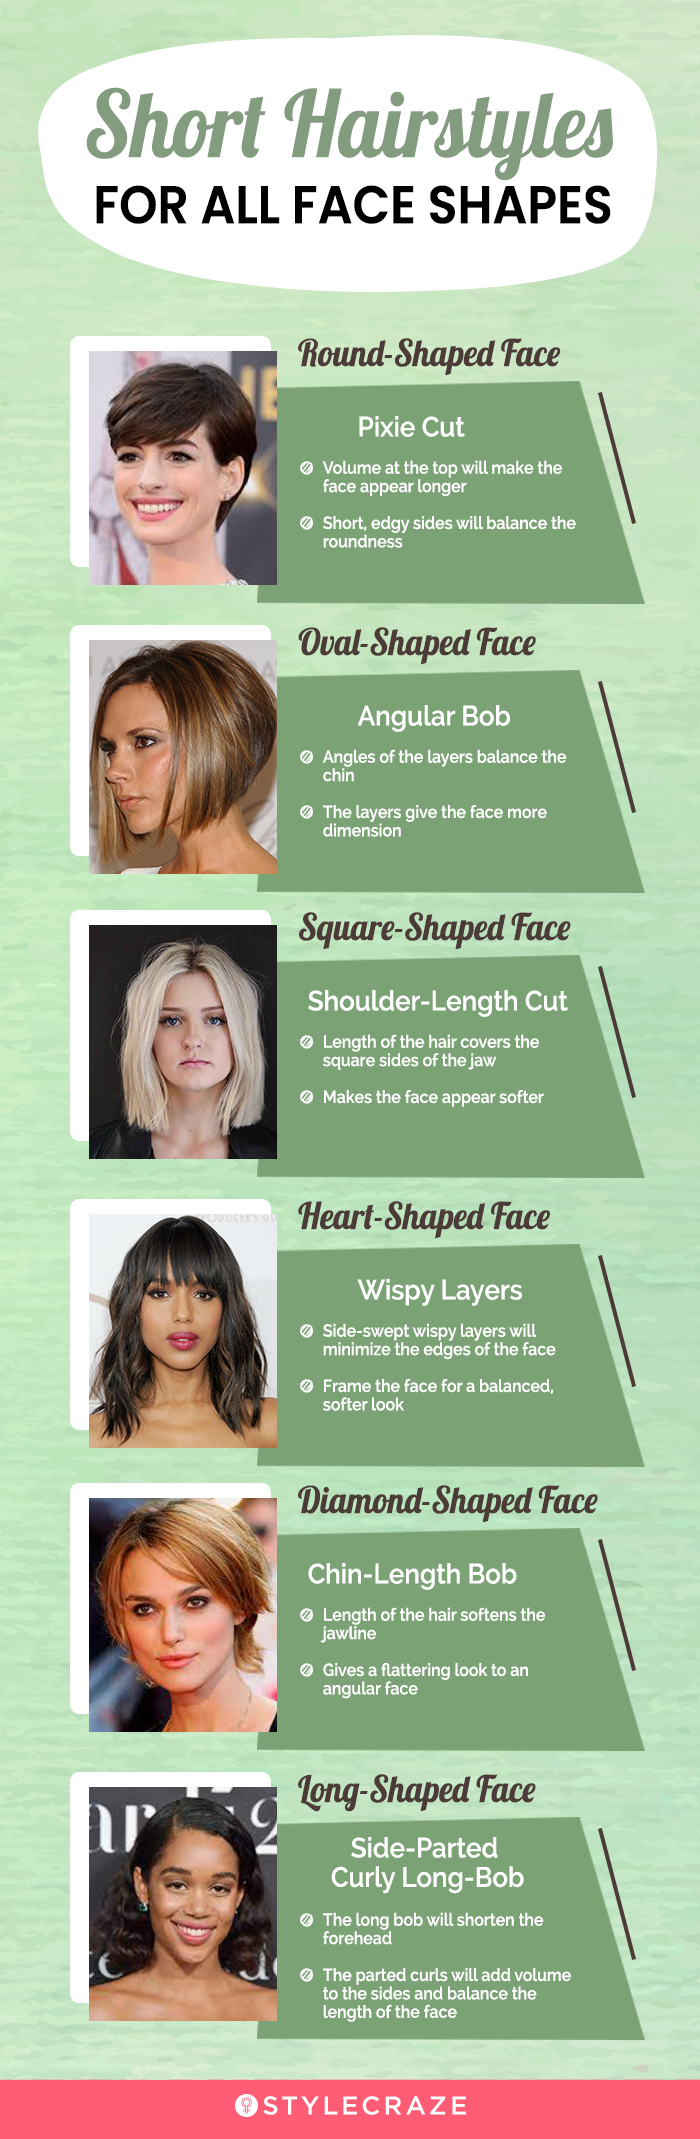 short hairstyles for all face shapes (infographic) 